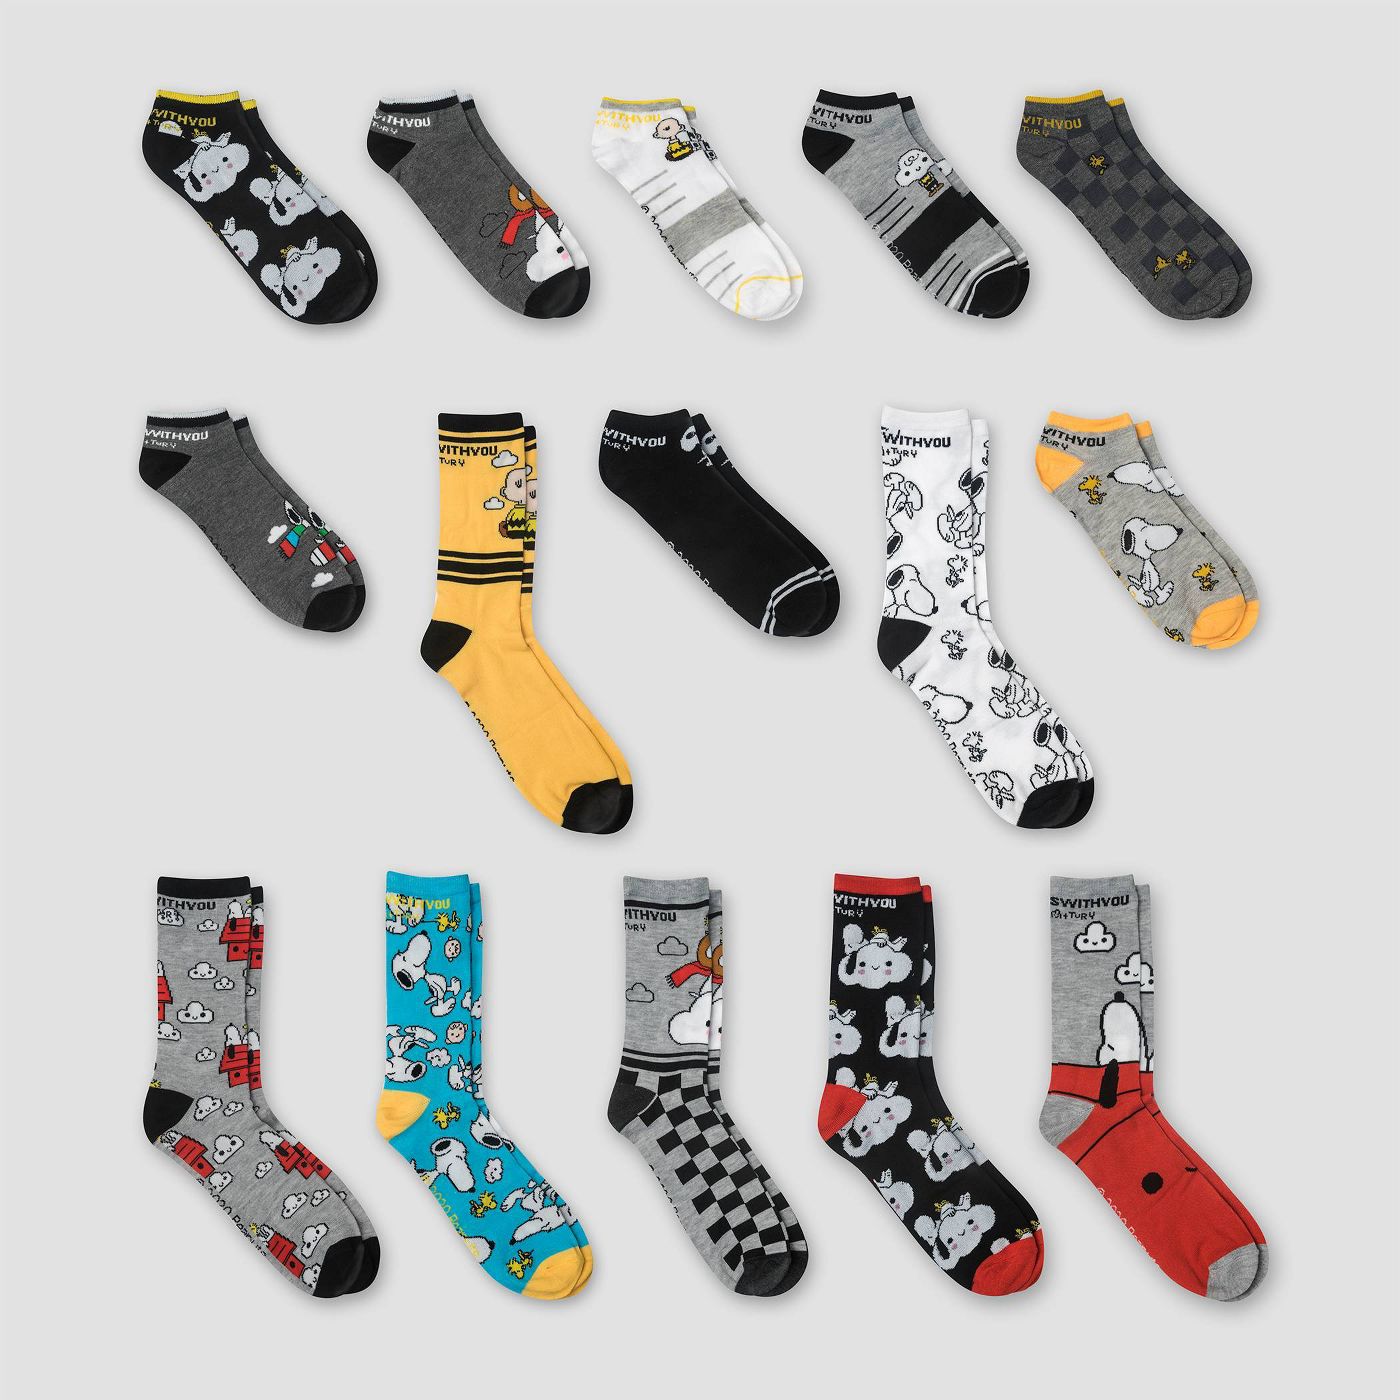 Men's Peanuts 15 Days of Socks Advent Calendar - Assorted Colors One Size - image 1 of 5